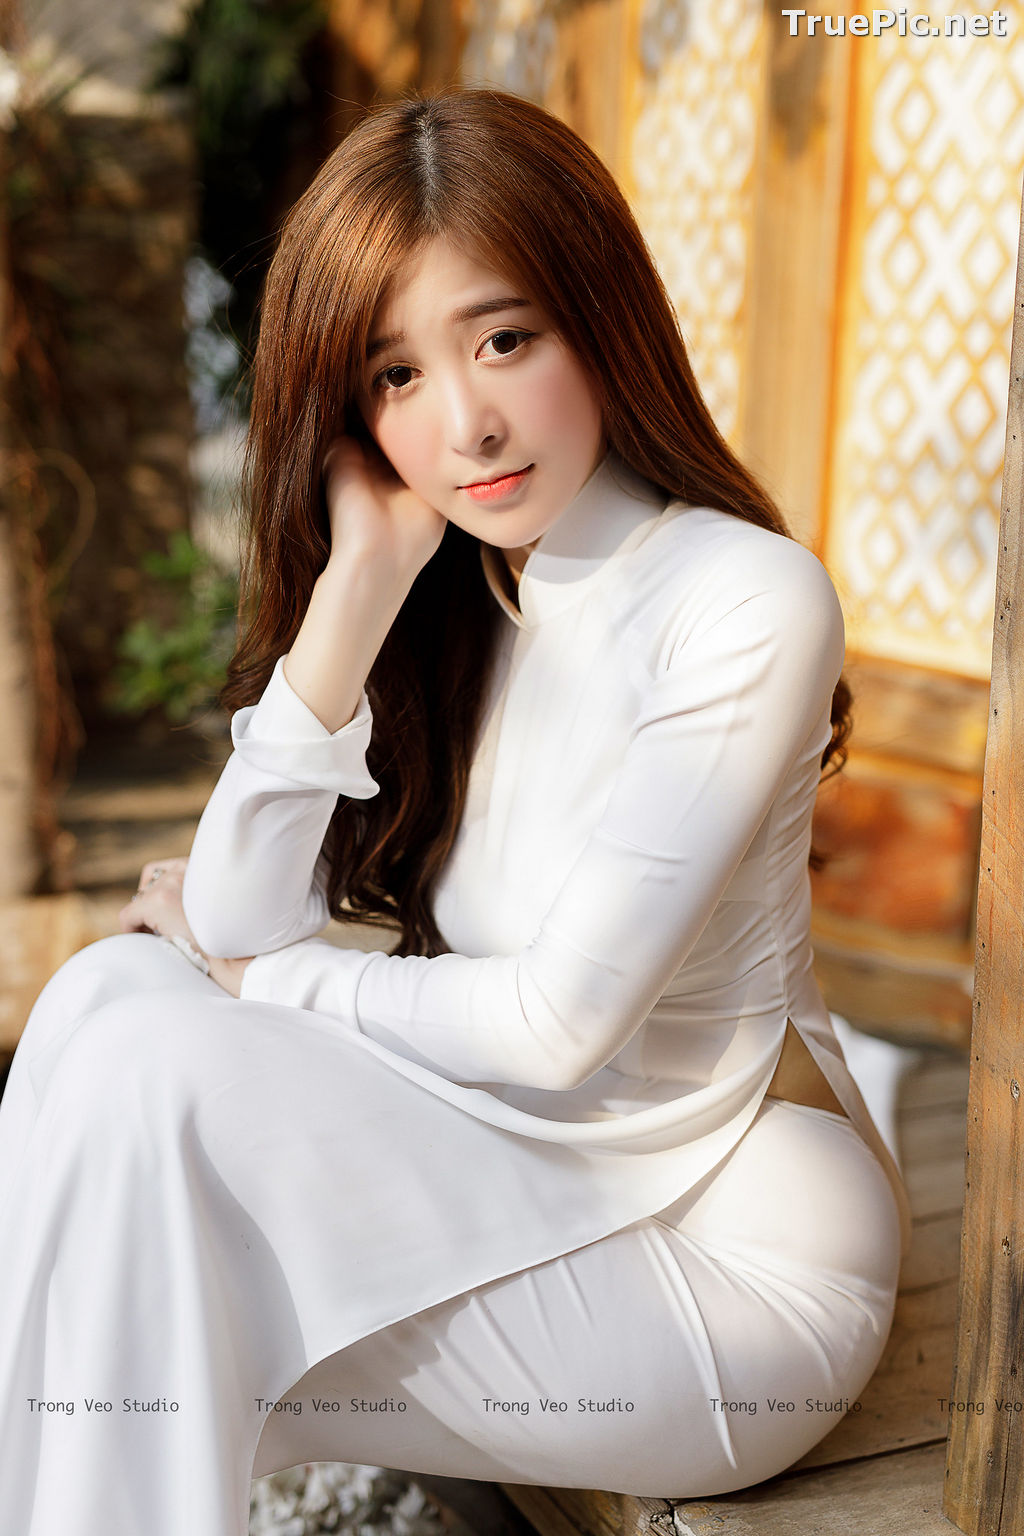 Image The Beauty of Vietnamese Girls with Traditional Dress (Ao Dai) #4 - TruePic.net - Picture-23